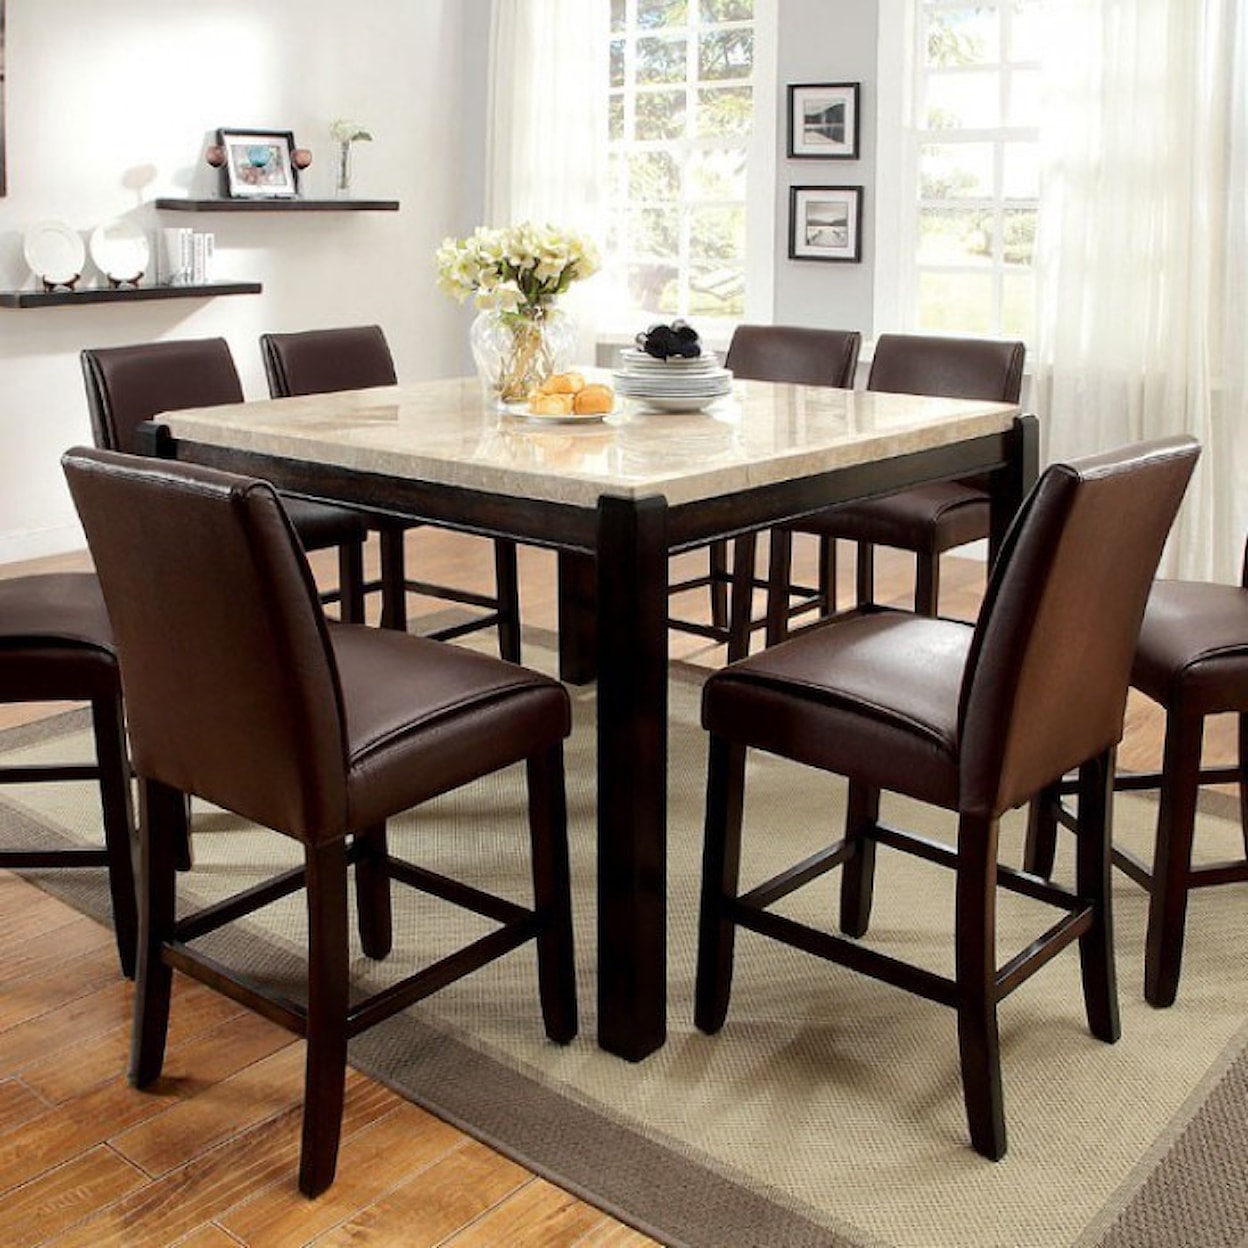 Furniture of America Grandstone II Counter Height Dining Table